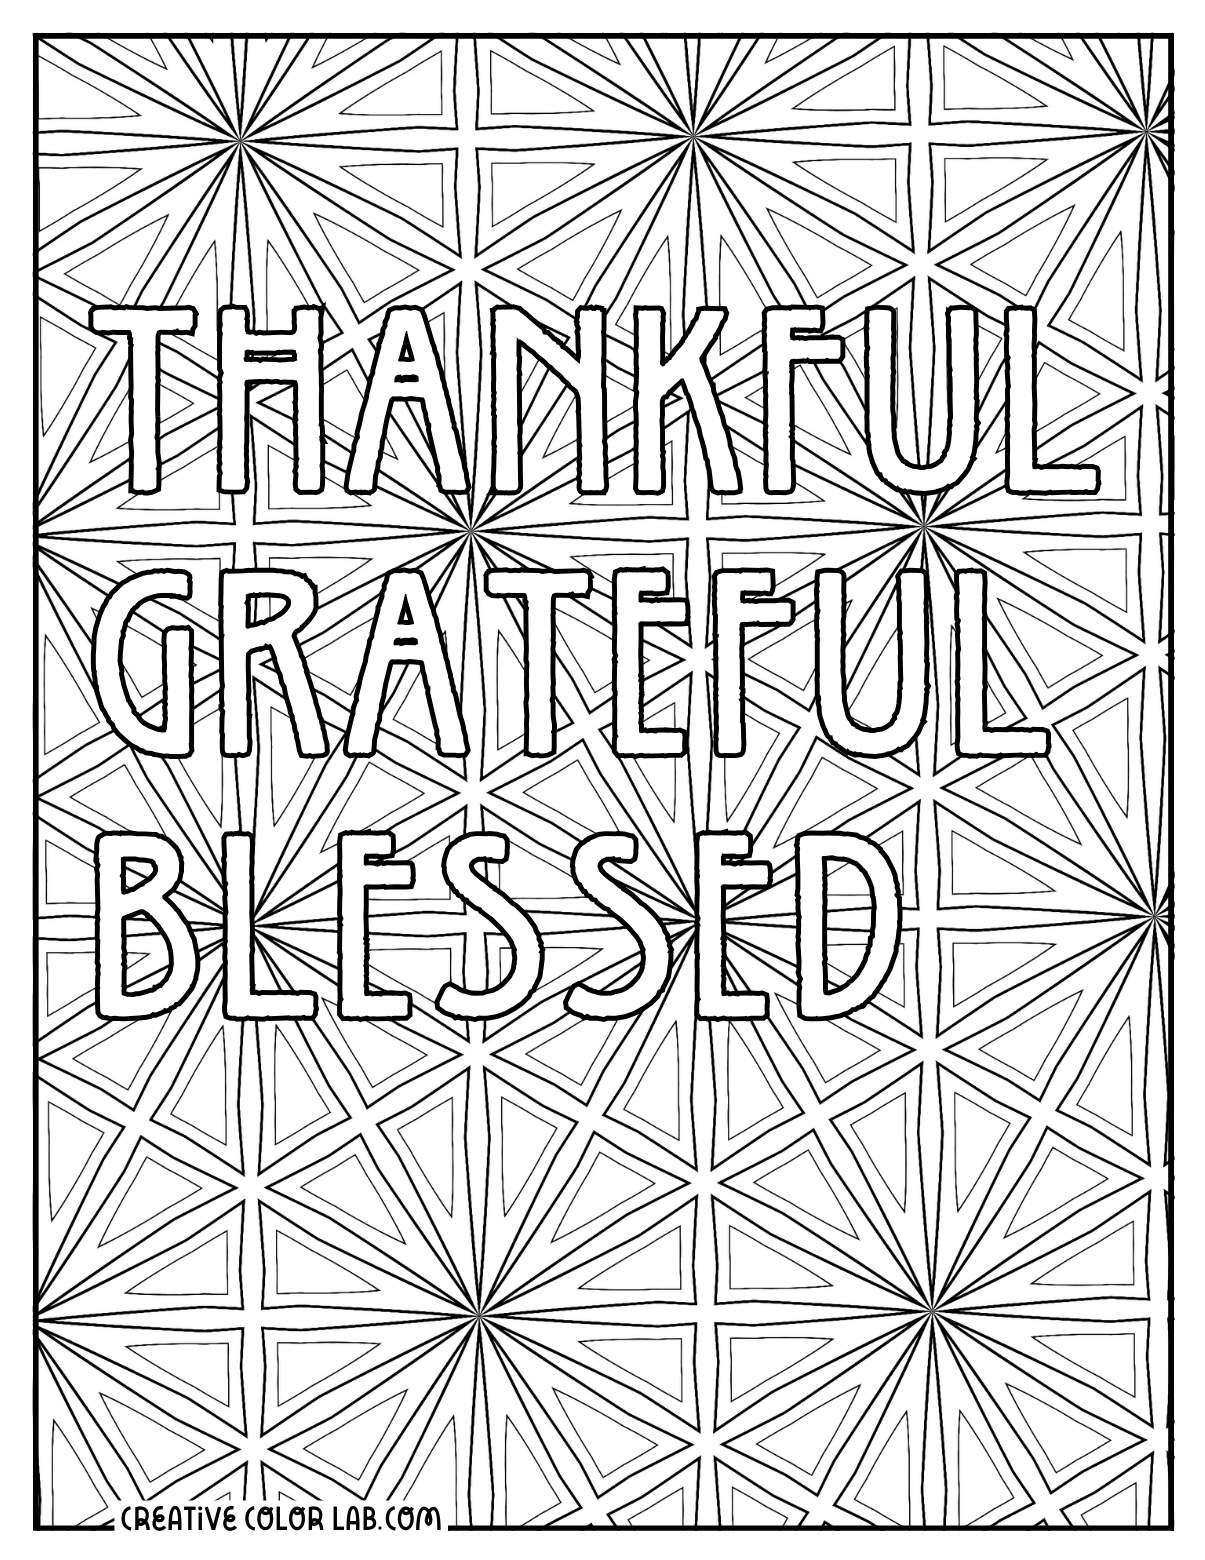 Blessed Christian coloring sheet for adults.